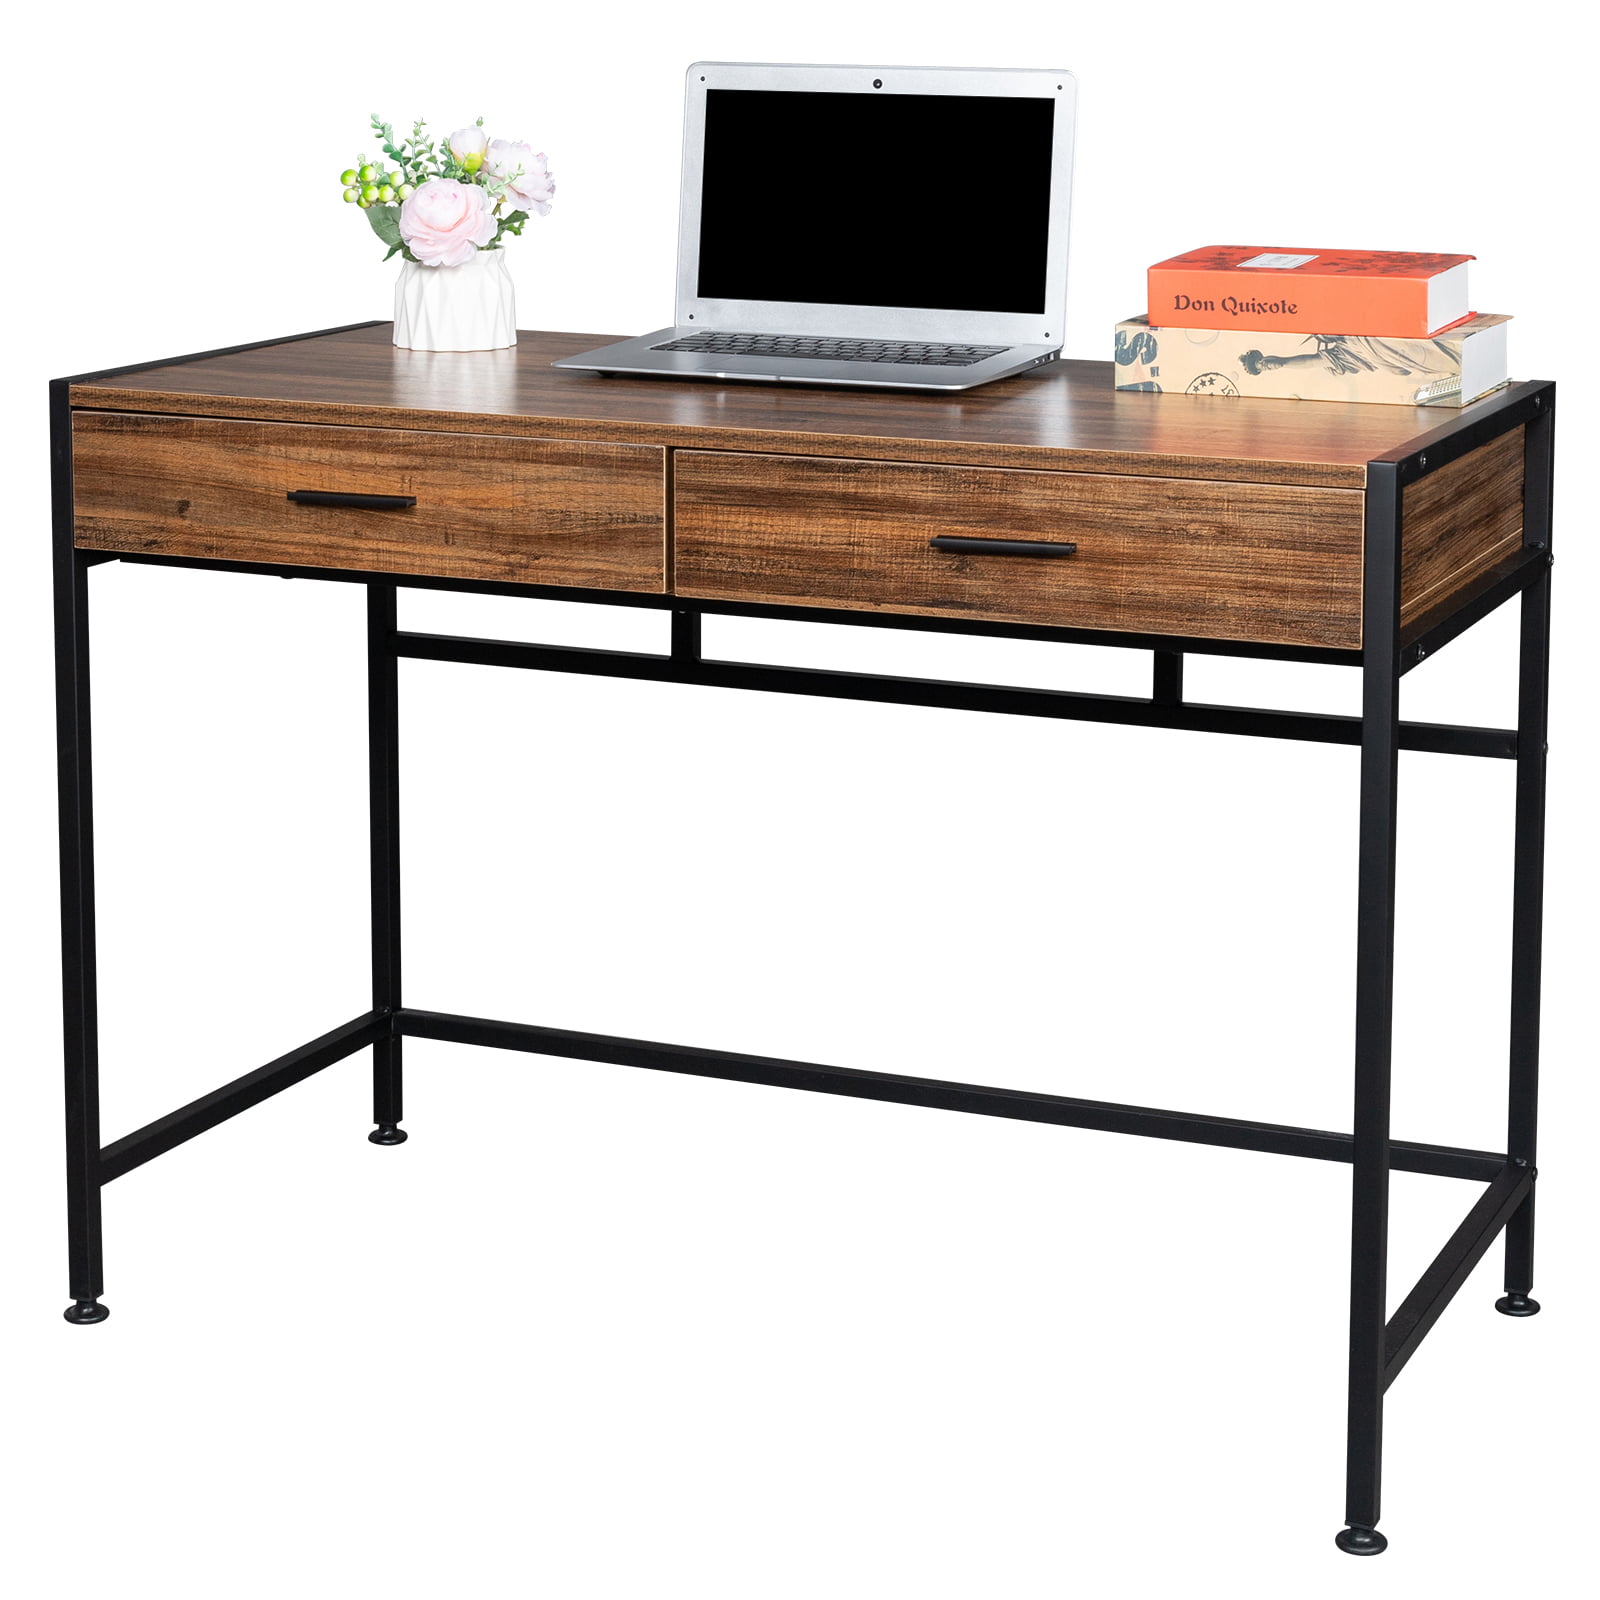 Details about   Folding Study Desk For Small Space Home Office Desk Laptop Writing Table New ee 